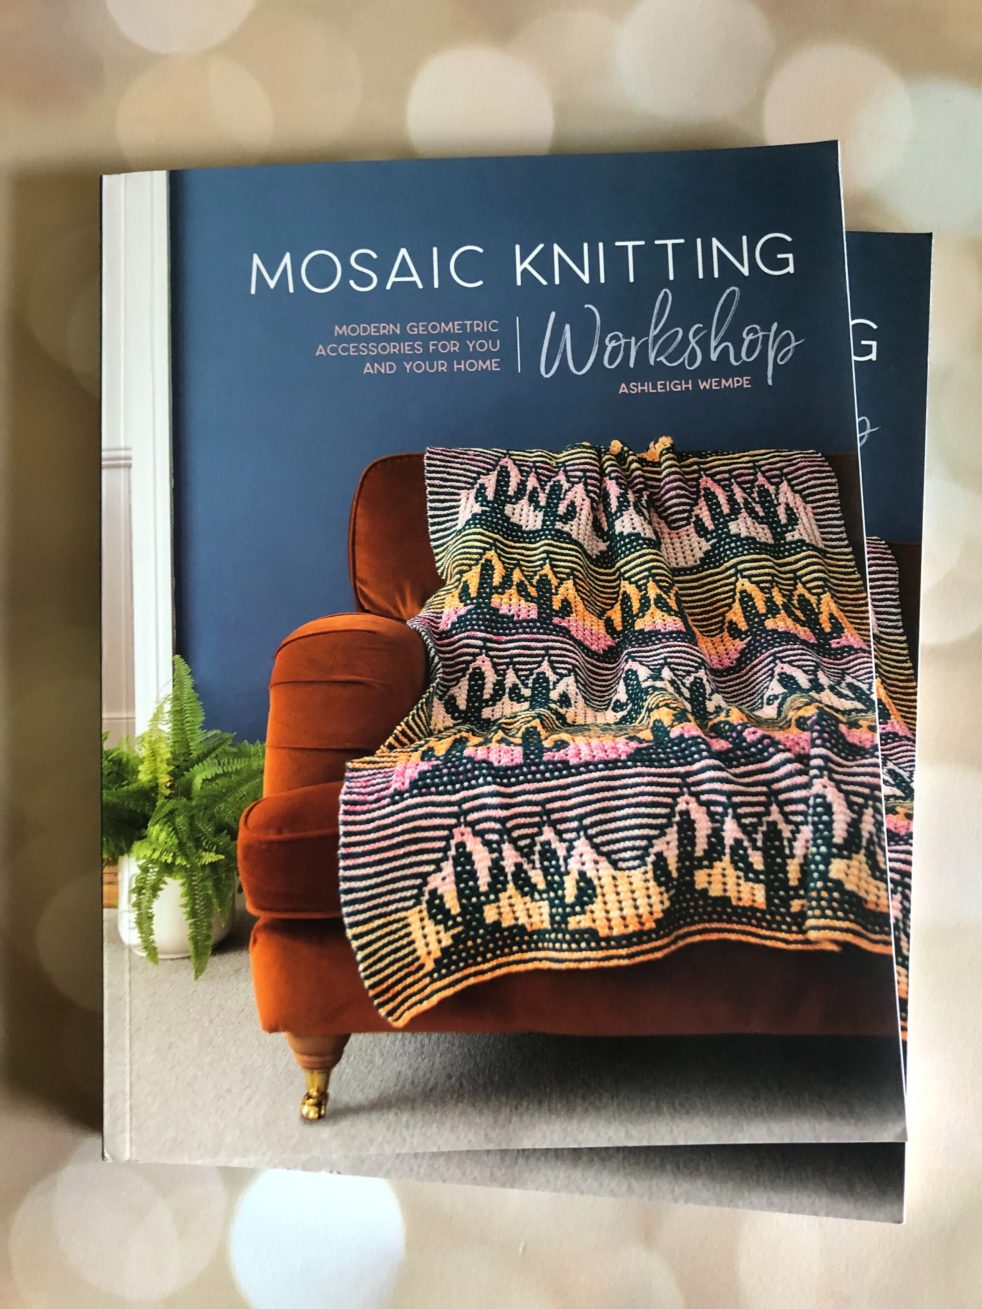 Two copies of Mosaic Knitting Workshop lay on a pink bokeh background. The cover features a mosaic knit blanket featuring cacti against a gradient background of pinks, oranges and yellows.